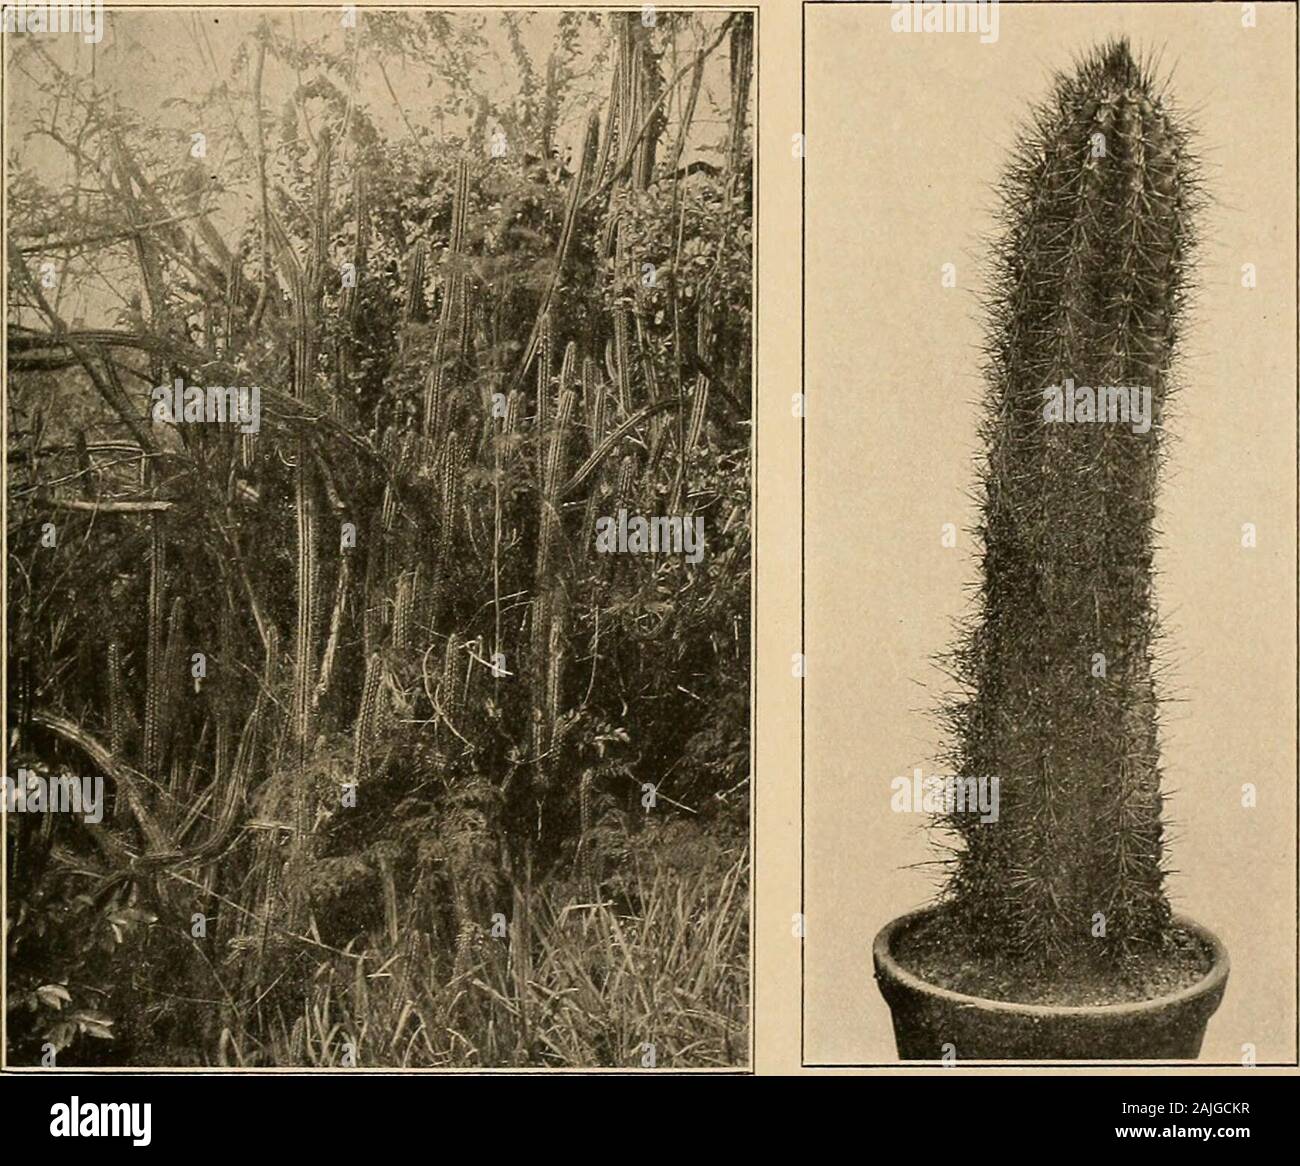 The Cactaceae : descriptions and illustrations of plants of the cactus family . as it is by Schumann. CEPHALOCEREUS. 45 long, numerous, light brown; flowering areoles confined to one sick- of the branch and near its top;sometimes only on 3 ribs, producing abundant, Long, white wool; flowers 5 to 6 cm. long; tube short and thick, greenish below, red above; perianth-segments numerous, light pink, spreading, obtuse;stamens scarcely exserted, dull yellowish white; style included; fruit red, subglobose, 3.5 cm. indiameter; seeds minute, shining, black. Collected by J. N. Rose in company with W. Now Stock Photo